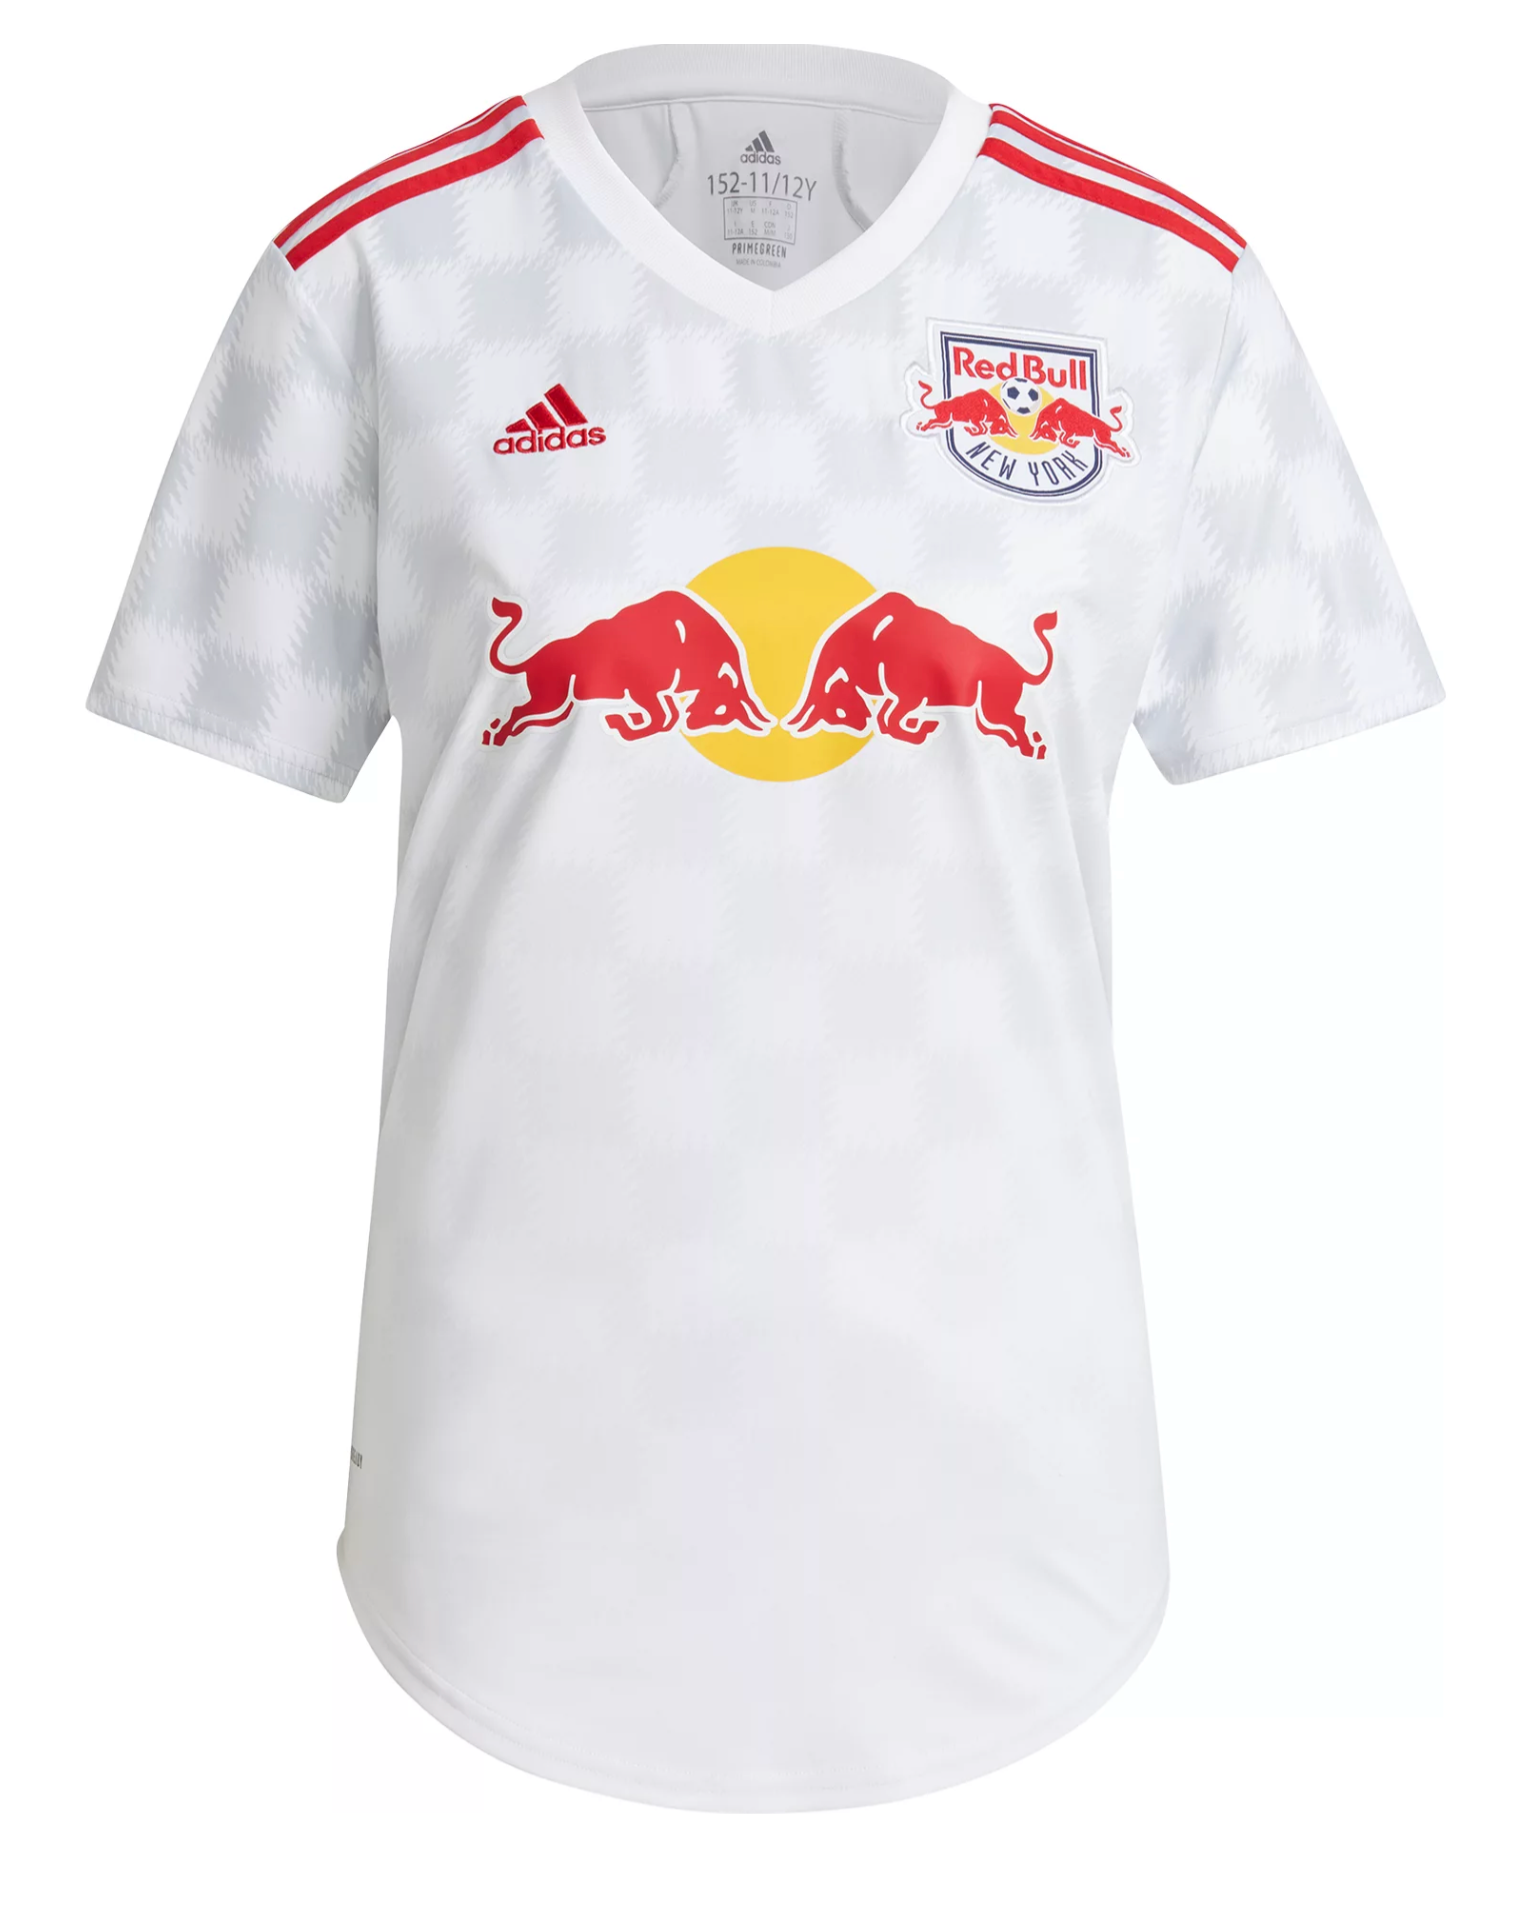 nyc red bulls jersey